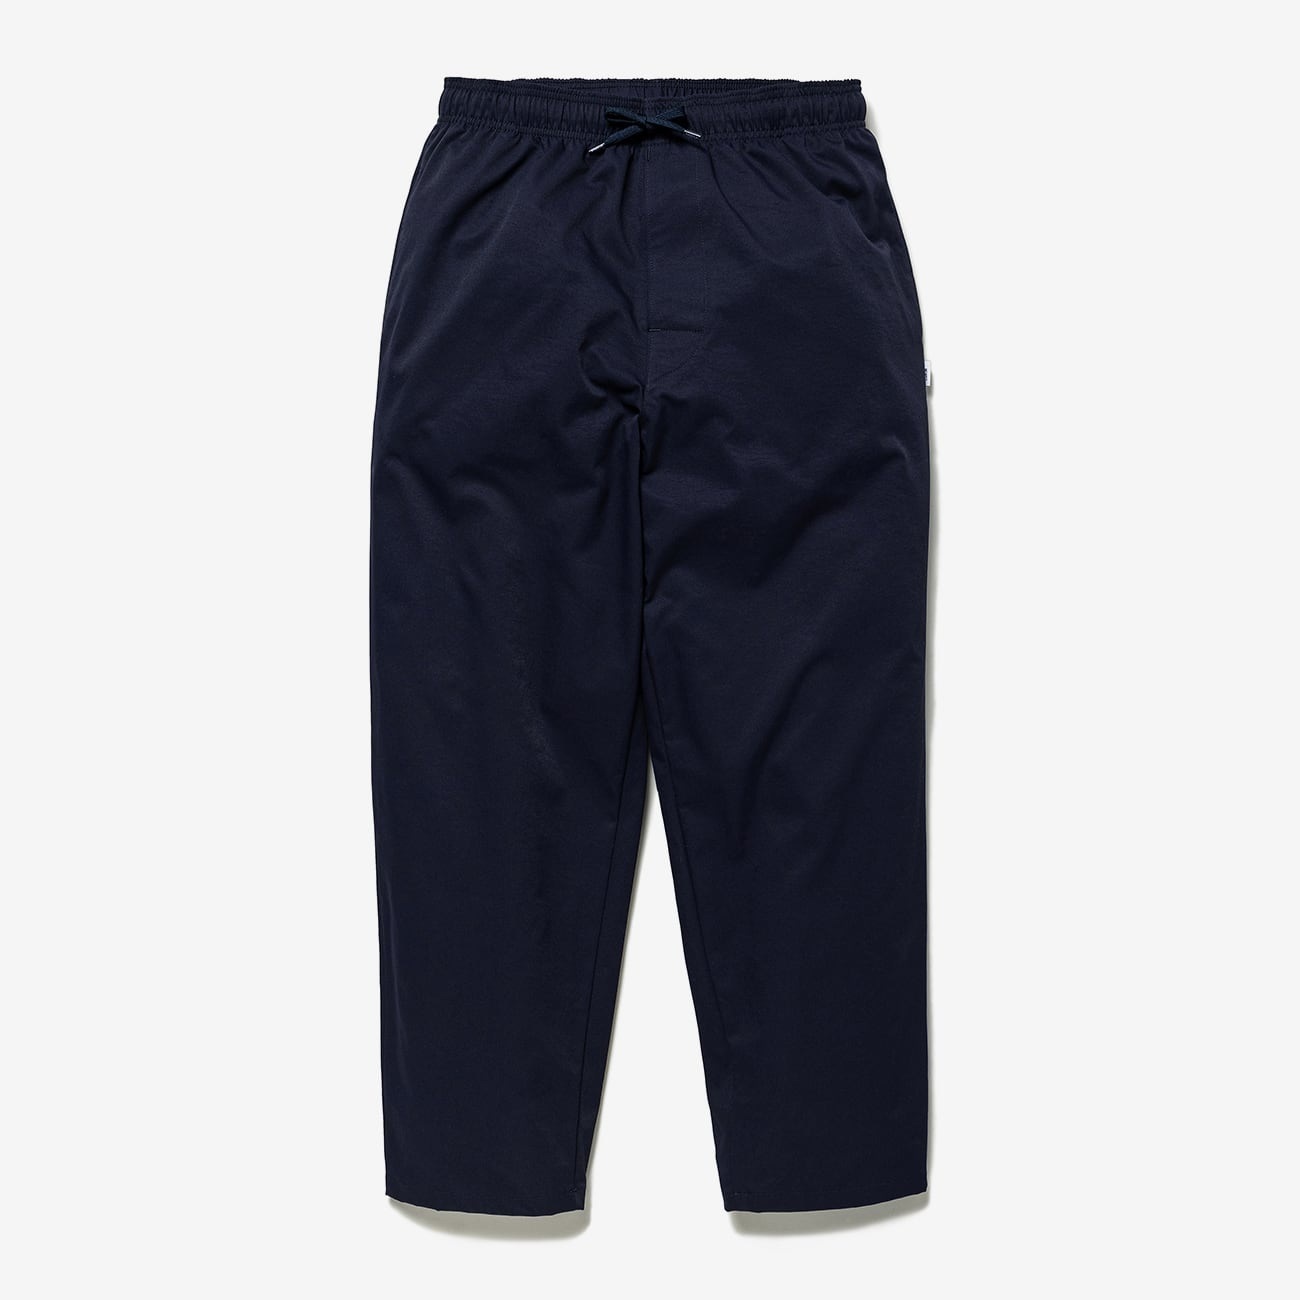 WTAPS SEAGULL 01 / TROUSERS / POLY. TWILL NAVY